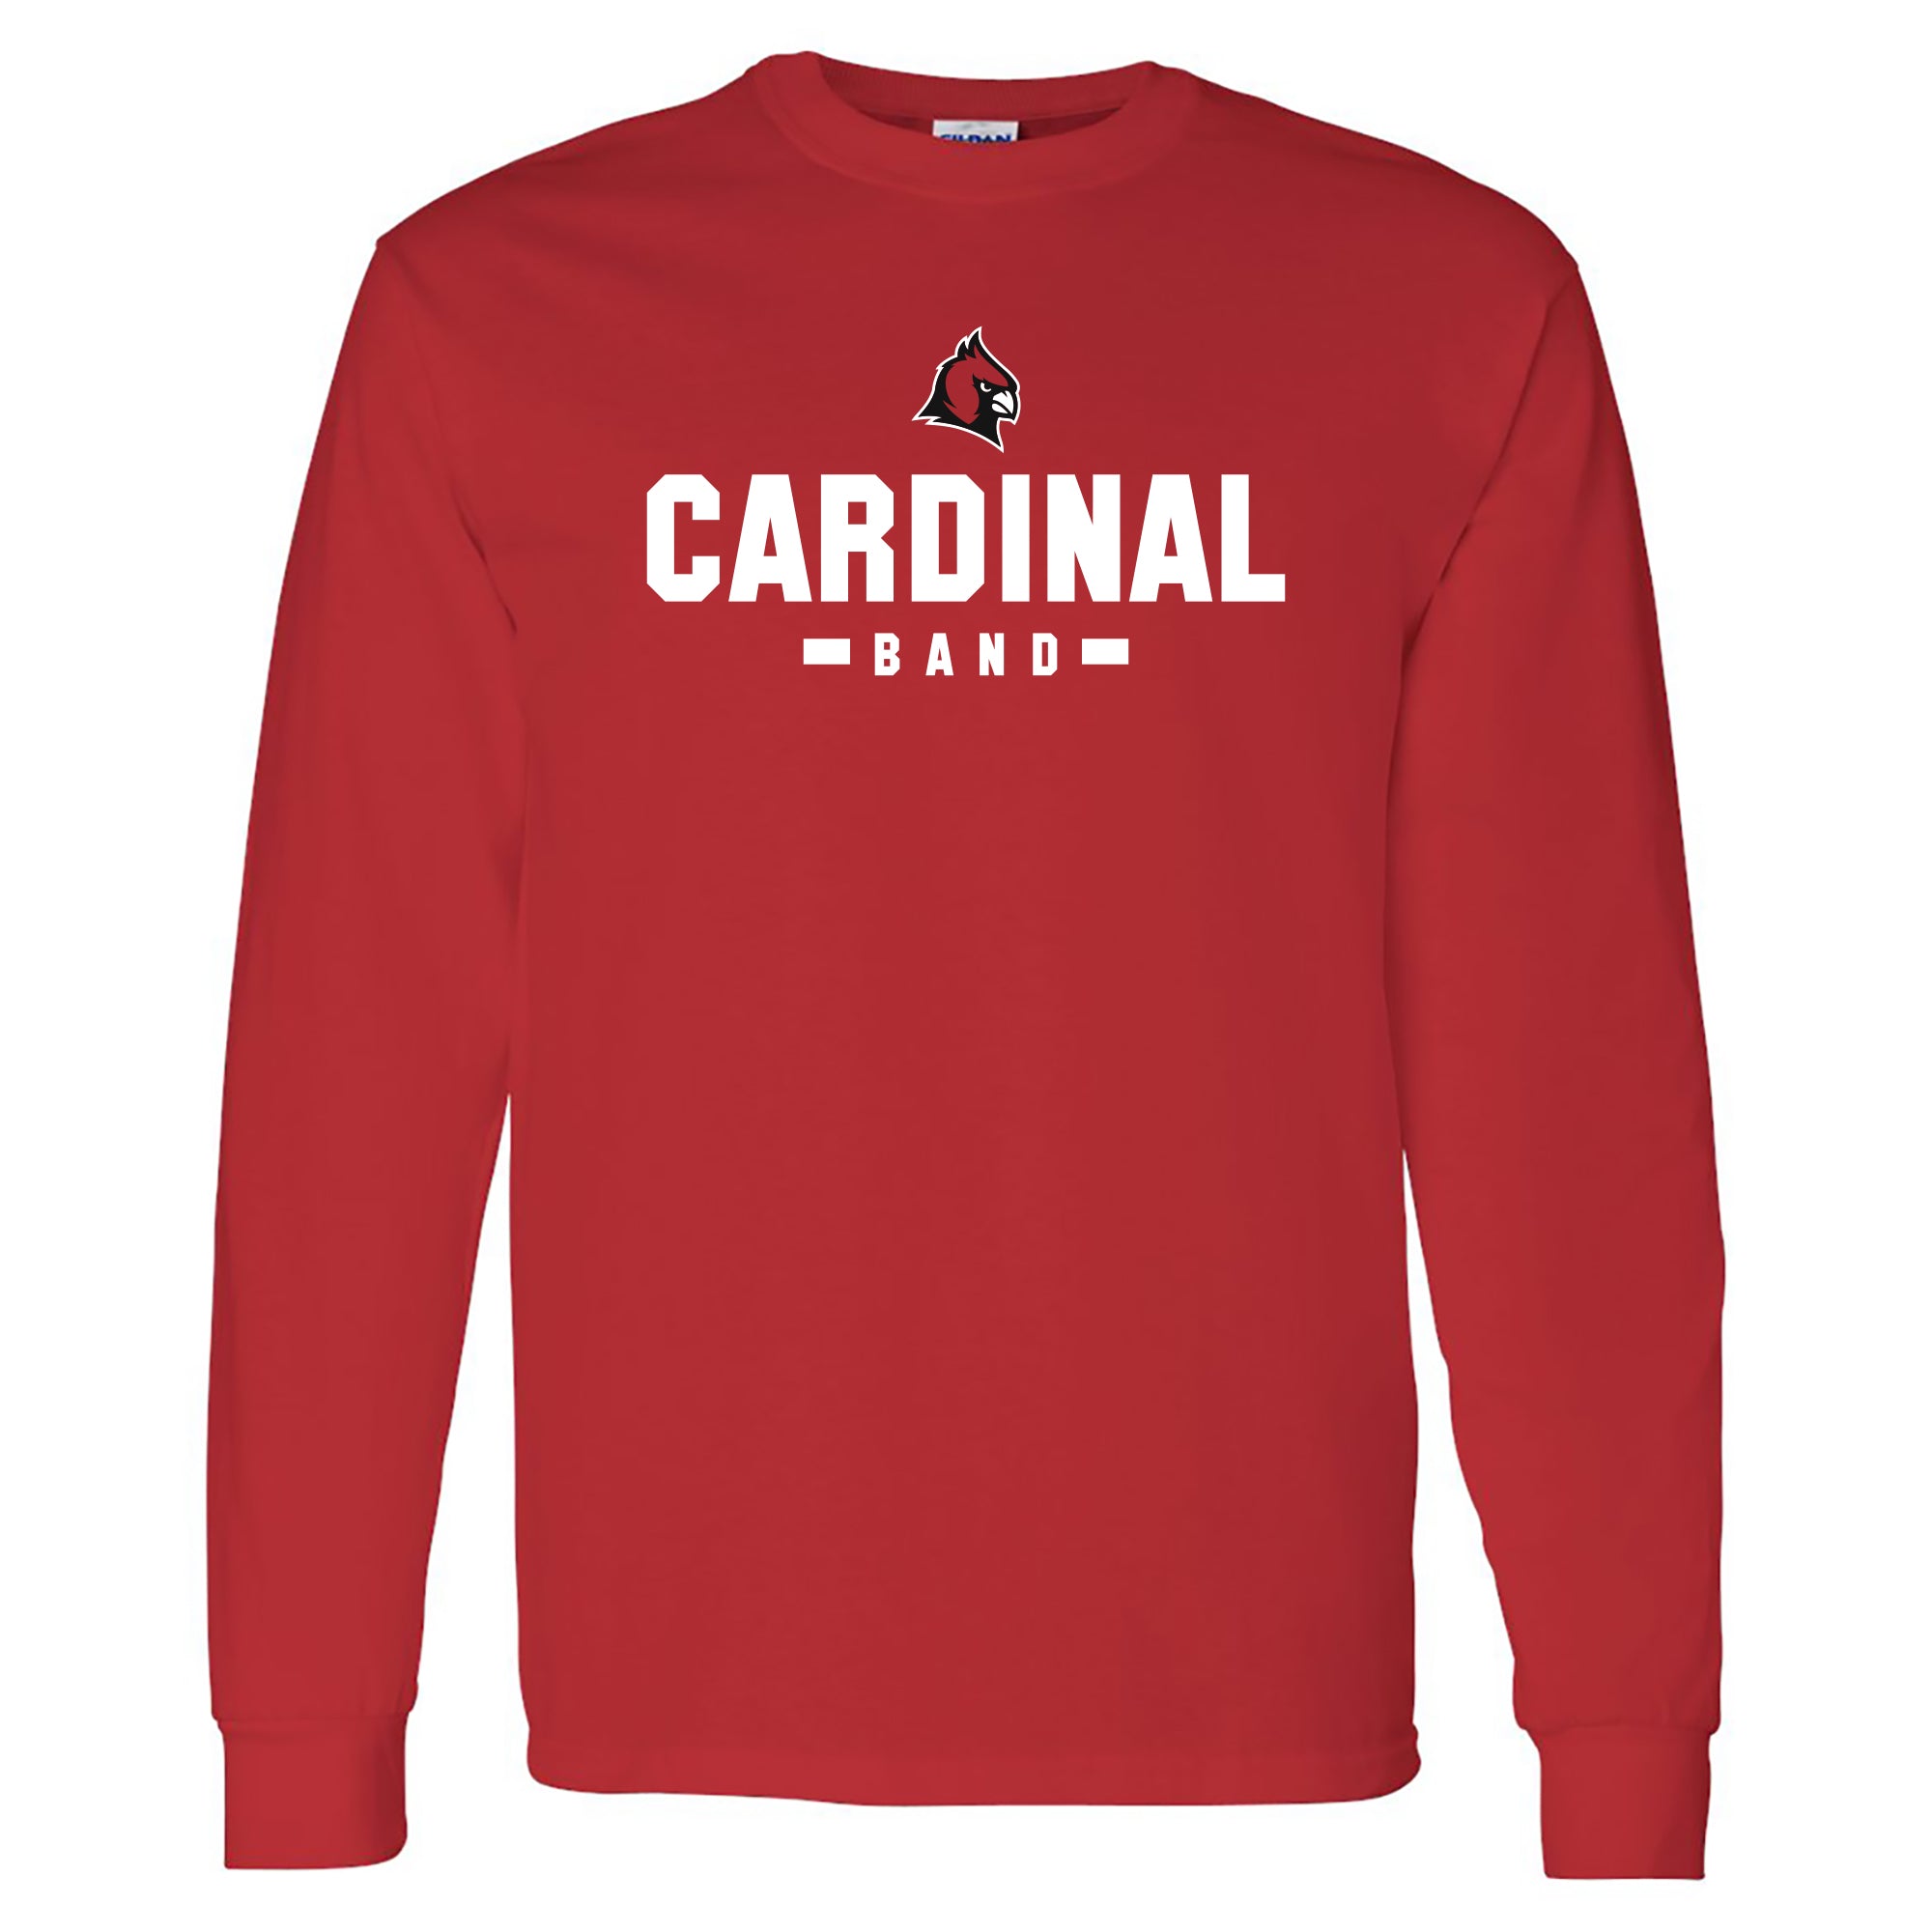 Concordia Cardinals Band Longsleeve T-Shirt - Red